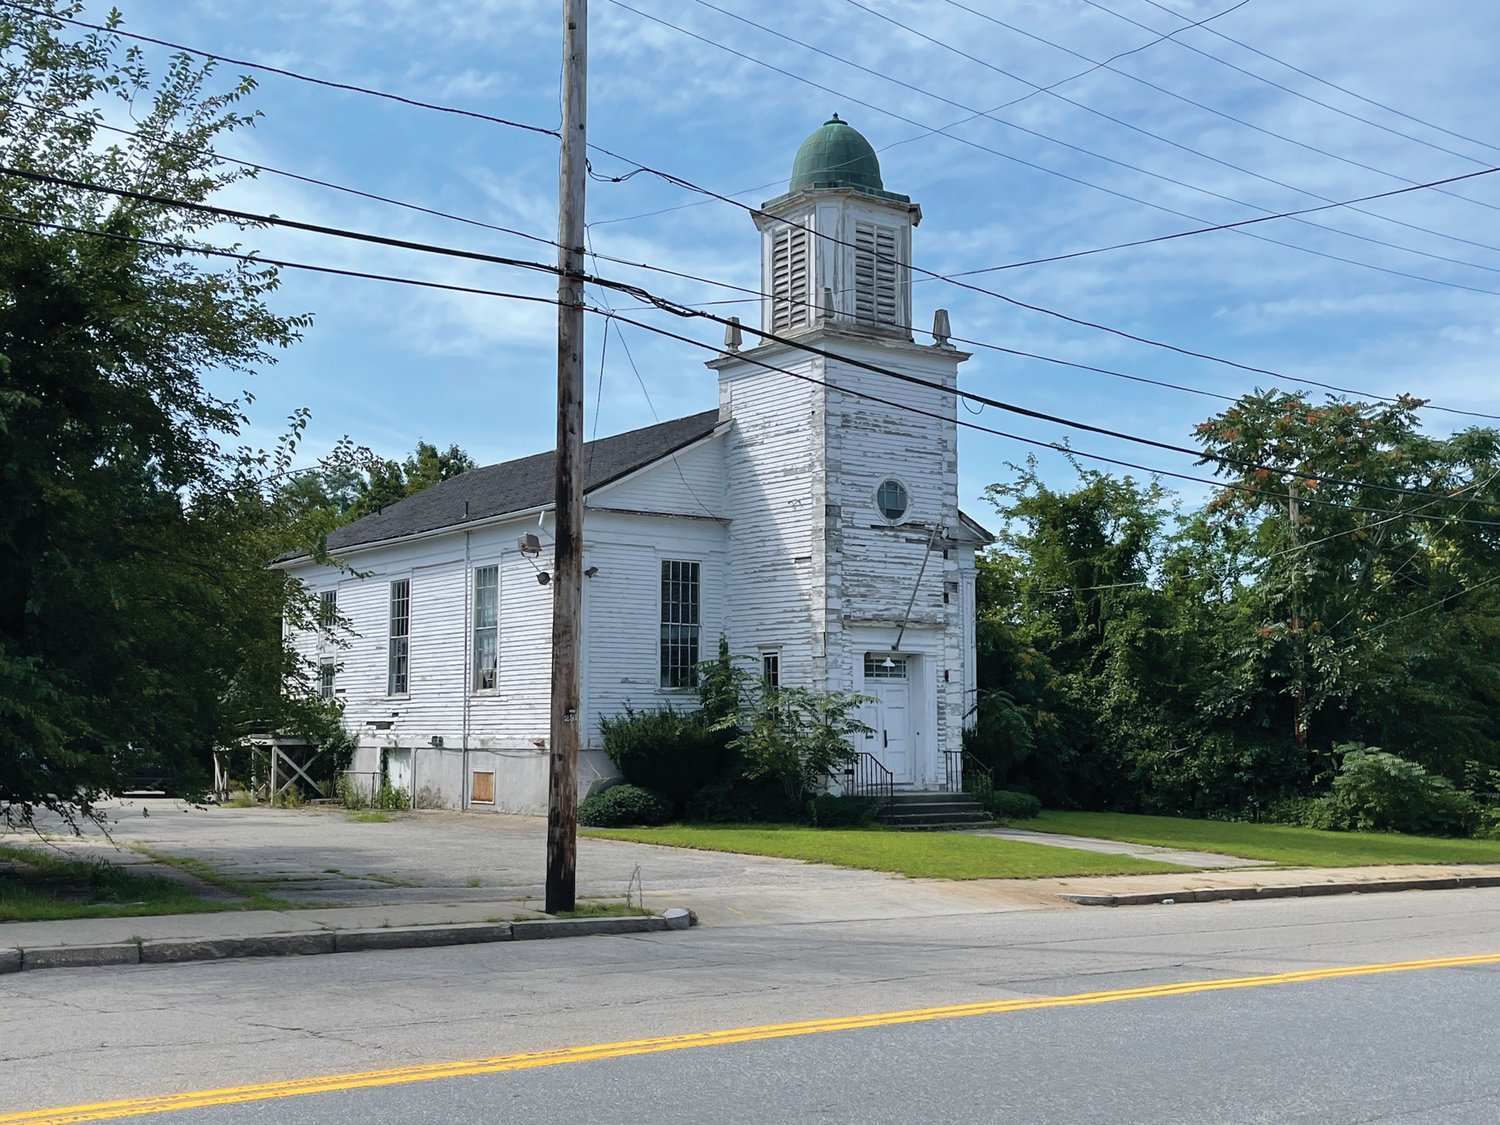 ONCE A MEETING PLACE: This historic meeting house – which began as the church for the Sprague mill village, became St. Bartholomew’s Episcopal Church, and now sits vacant – would become the home of a leasing office and commercial space under redevelopment plans for the Cranston Print Works site.